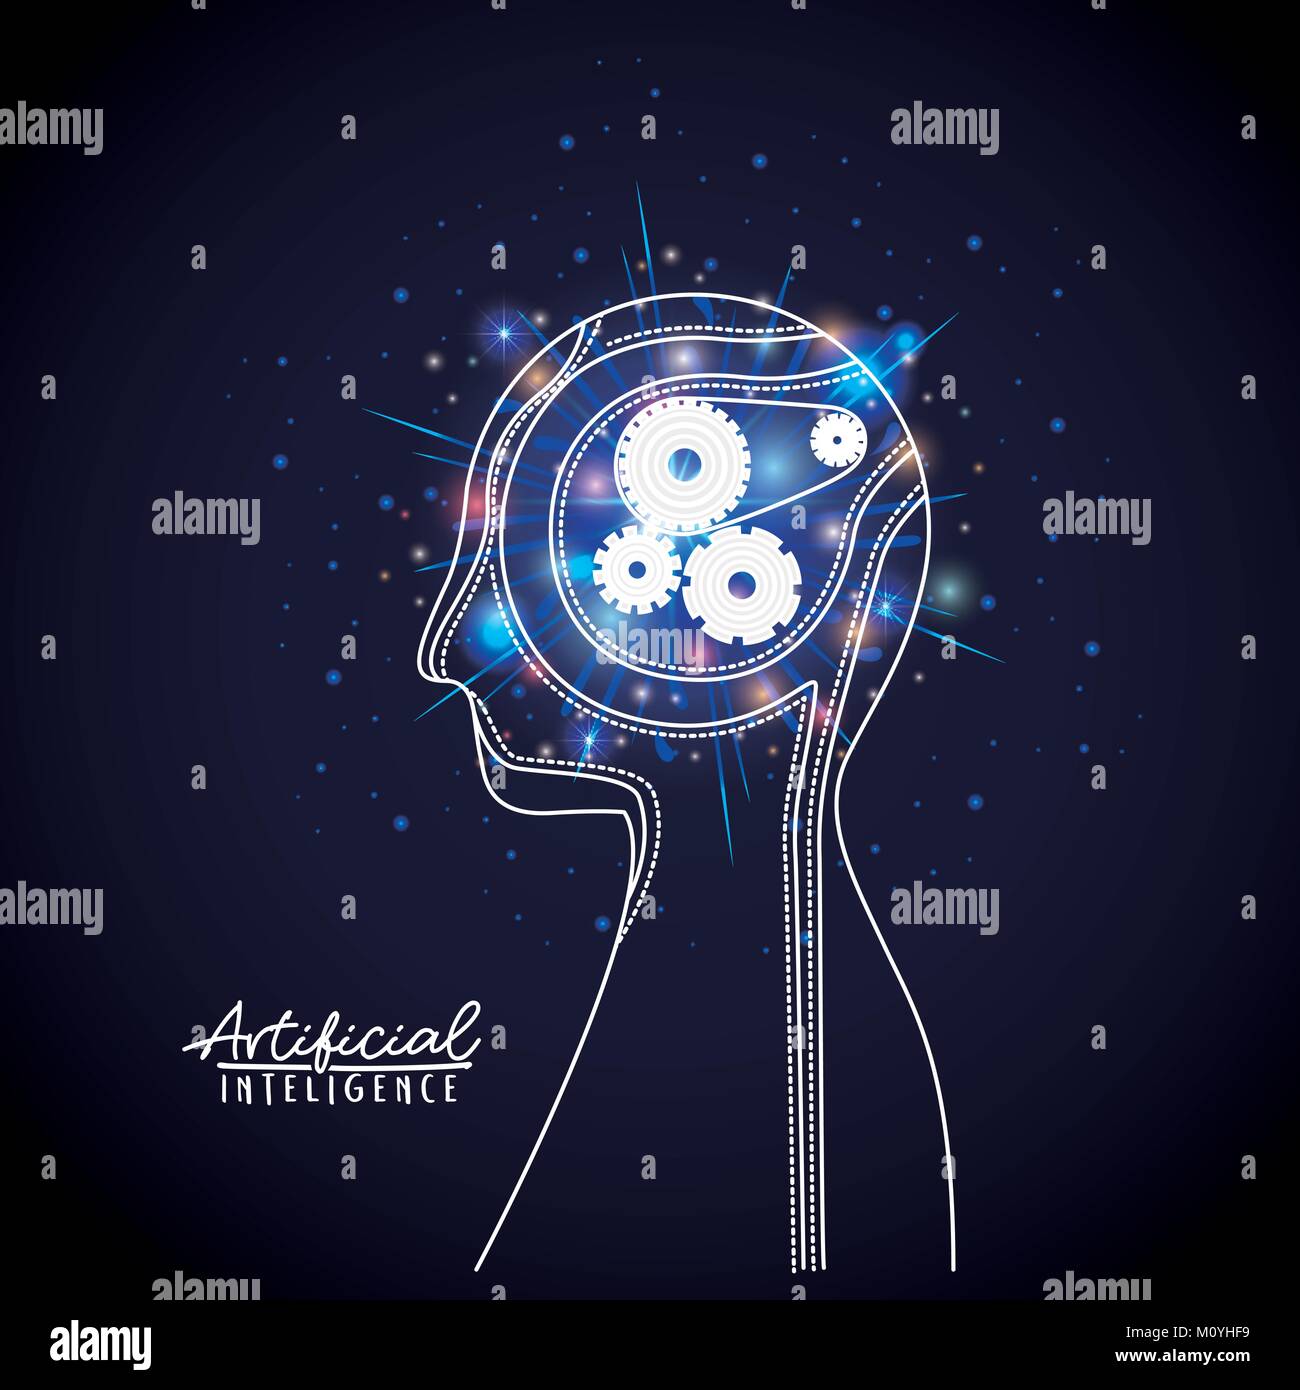 artificial intelligence poster with half body human silhouette with cogwheels mechanism brain in transparency over dark blue background with sparkles Stock Vector